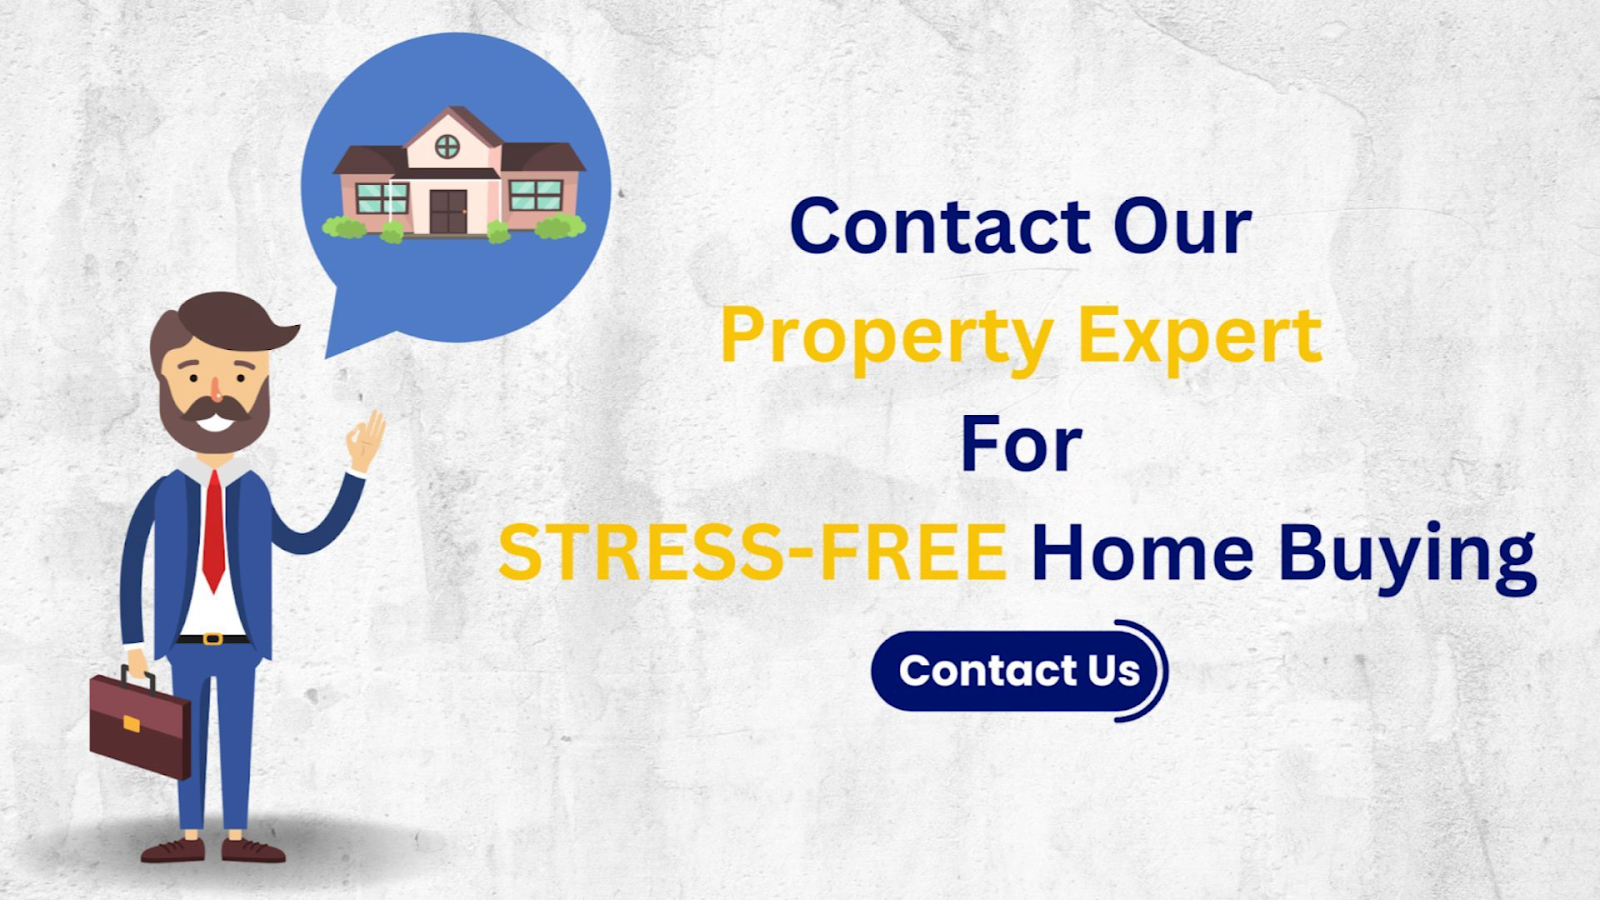 Contact PropertyCloud and get the best advice related to real estate.